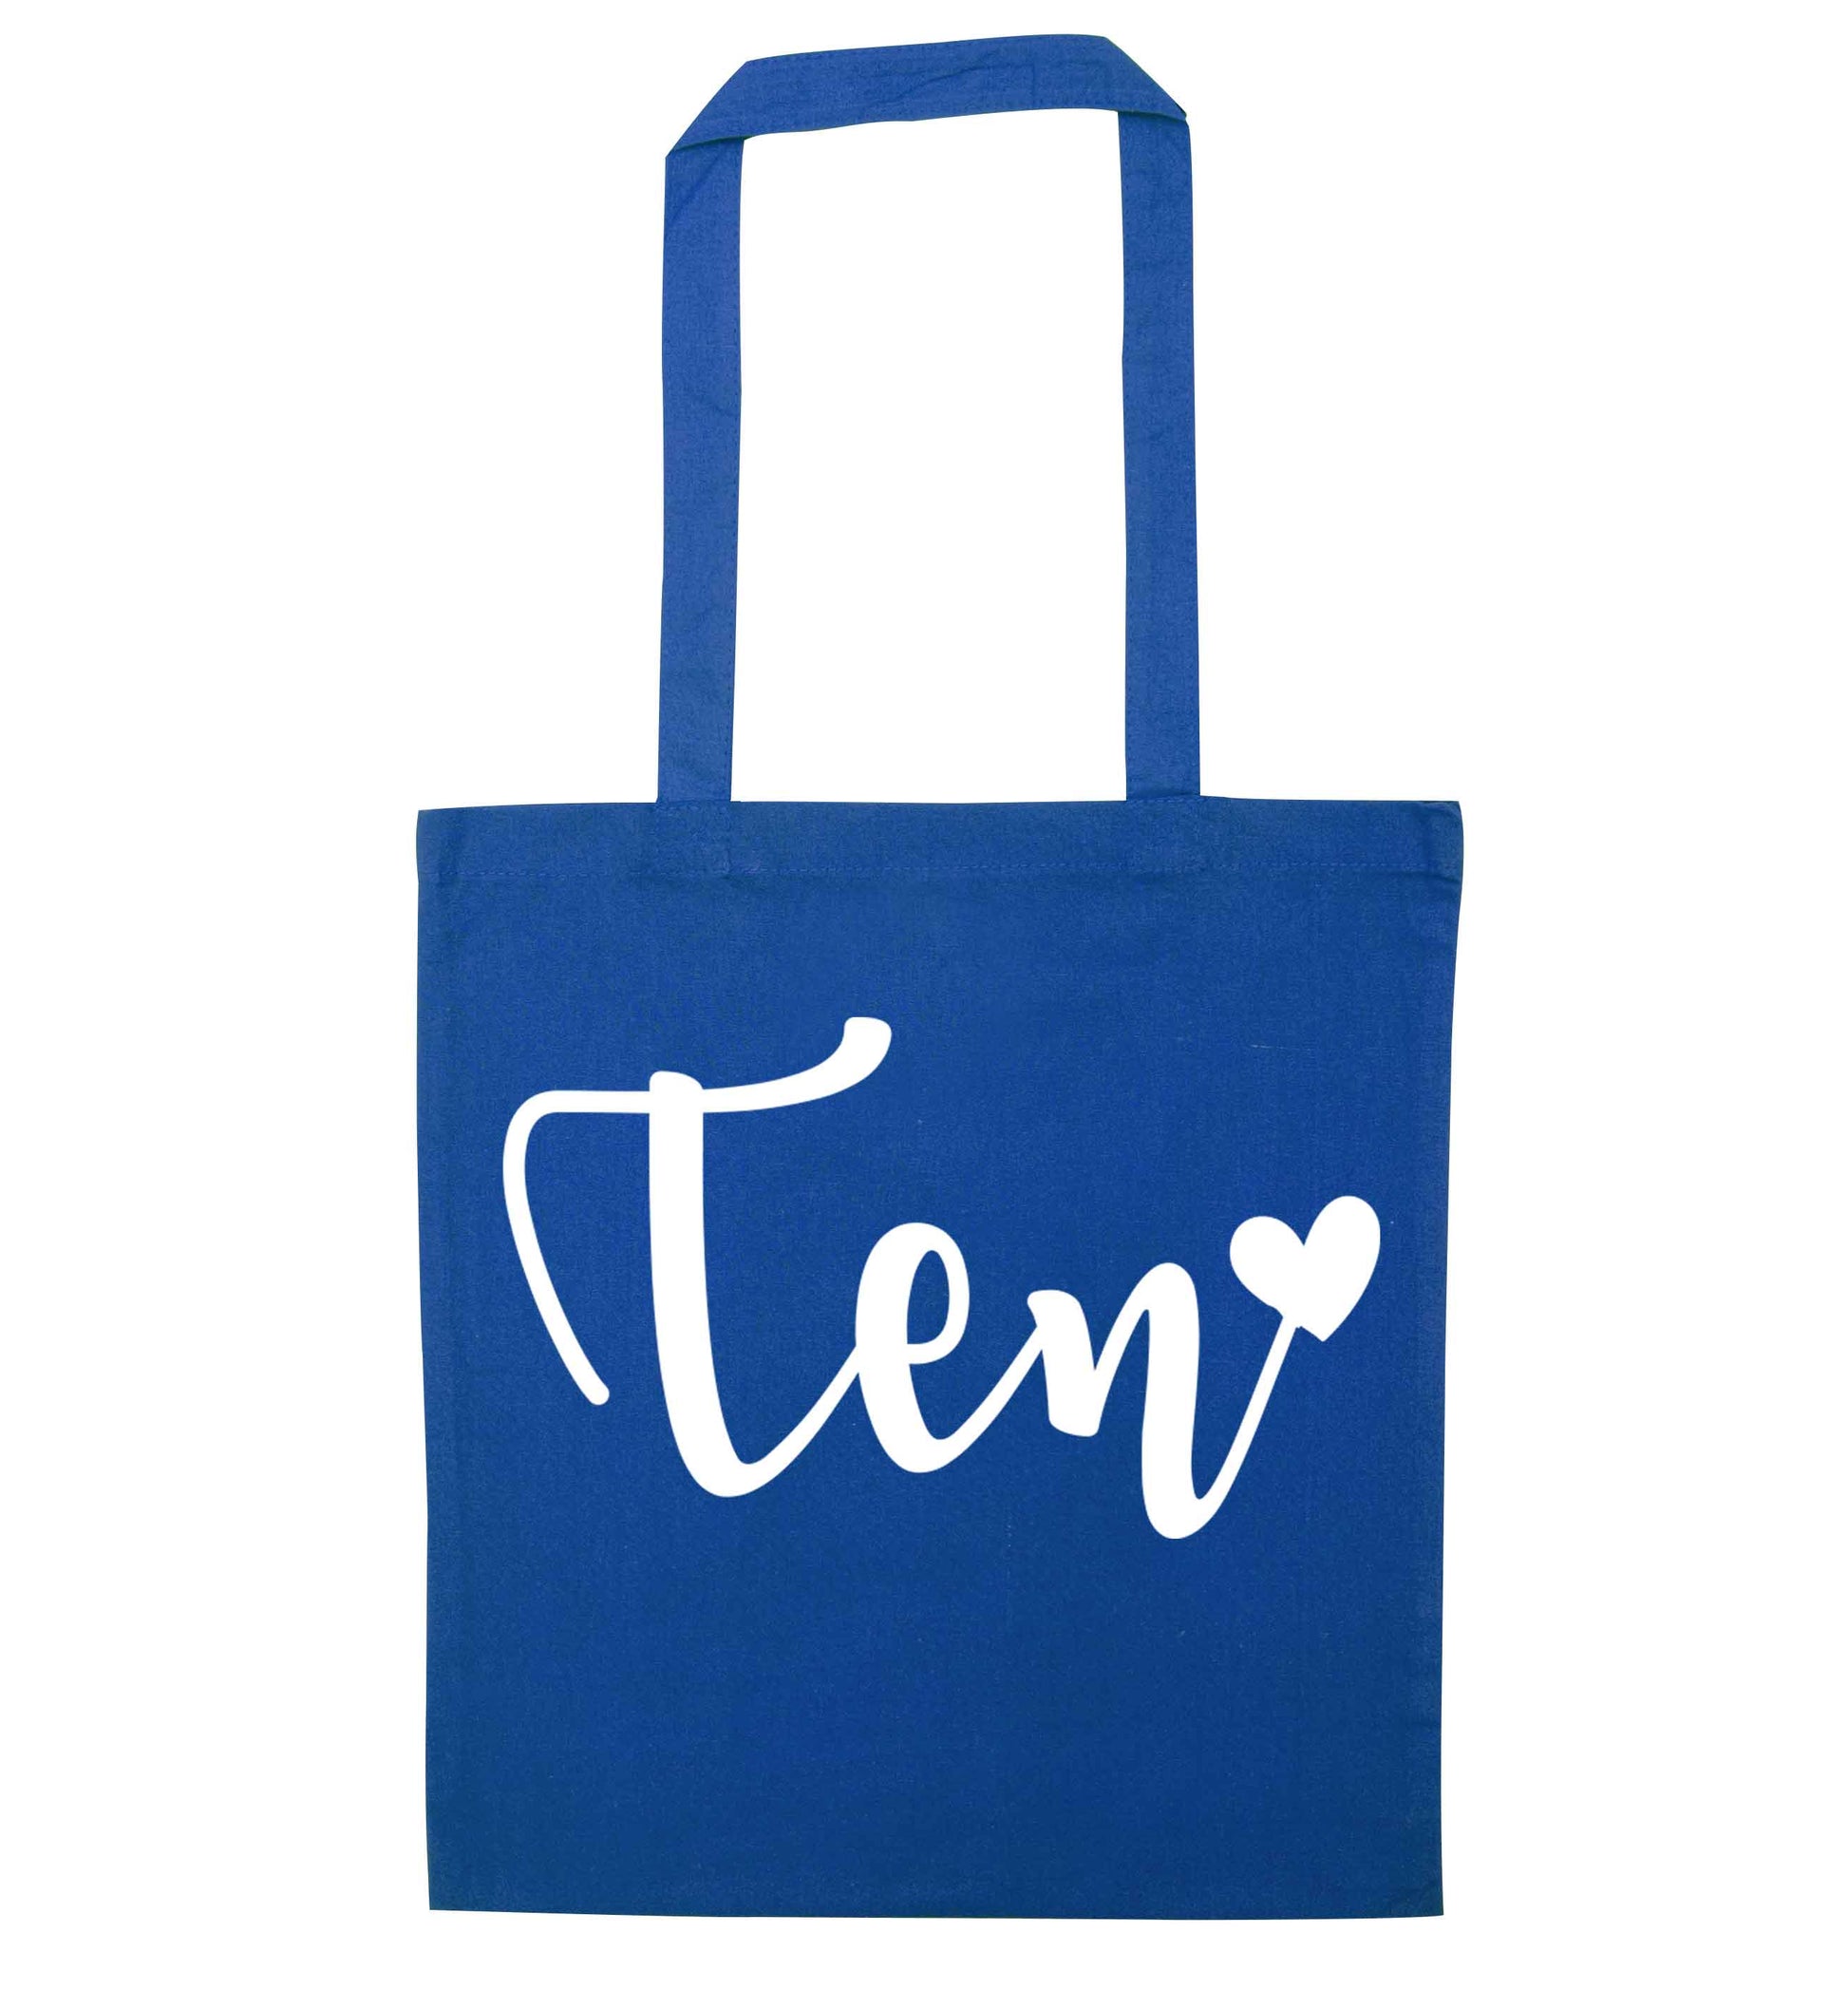 Ten and heart blue tote bag